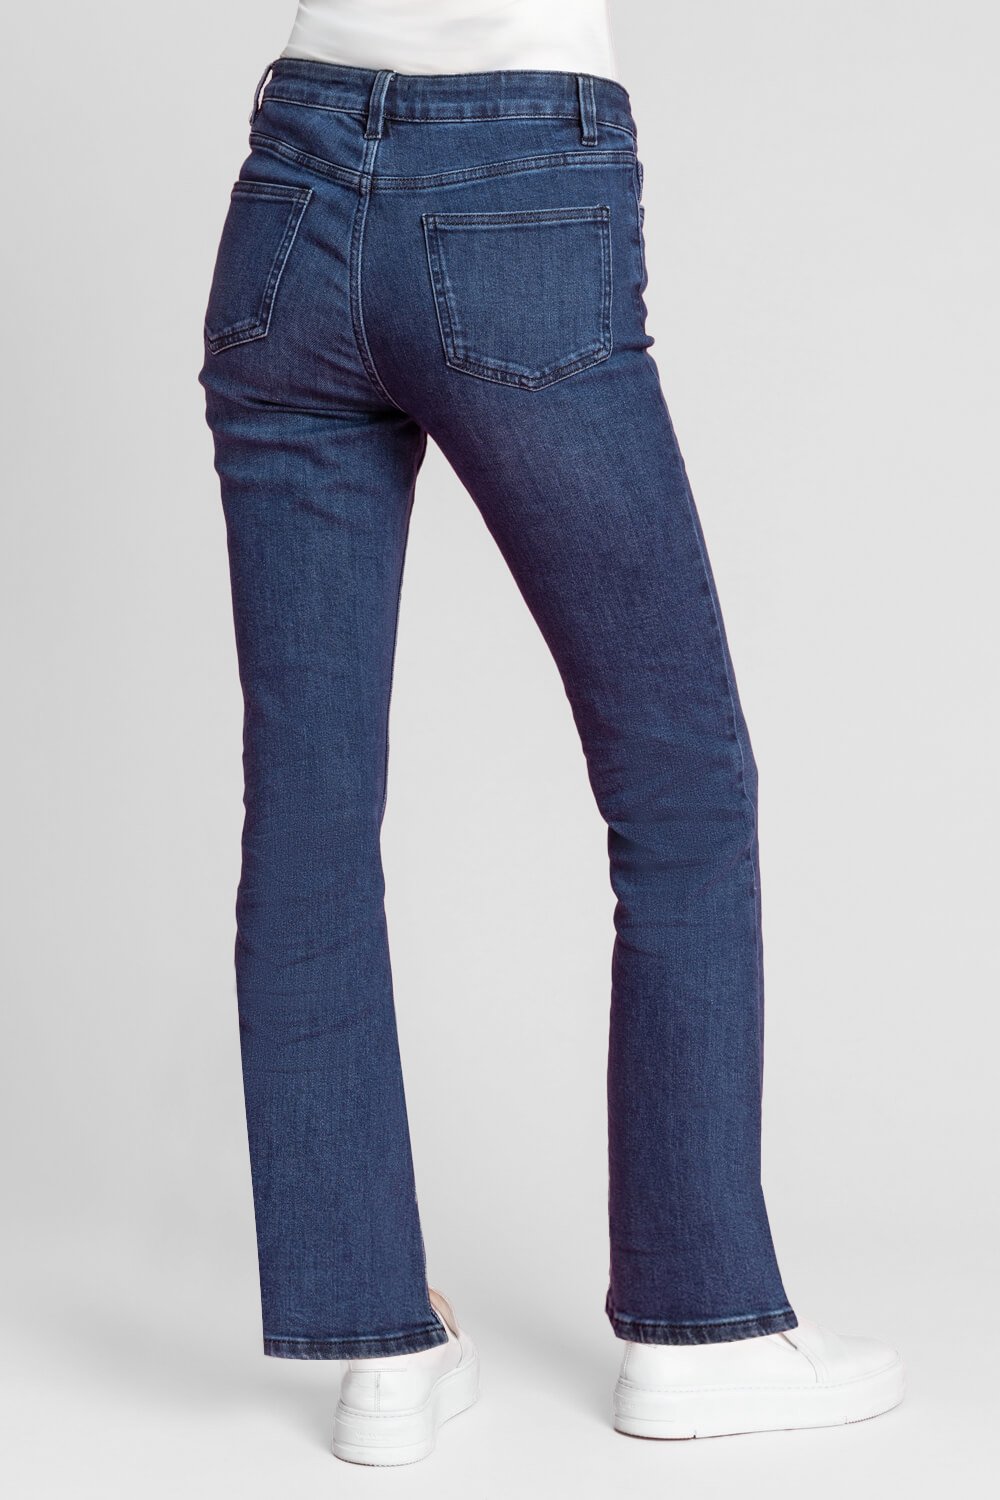 Blue 29" Essential Stretch Bootcut Jeans, Image 2 of 4